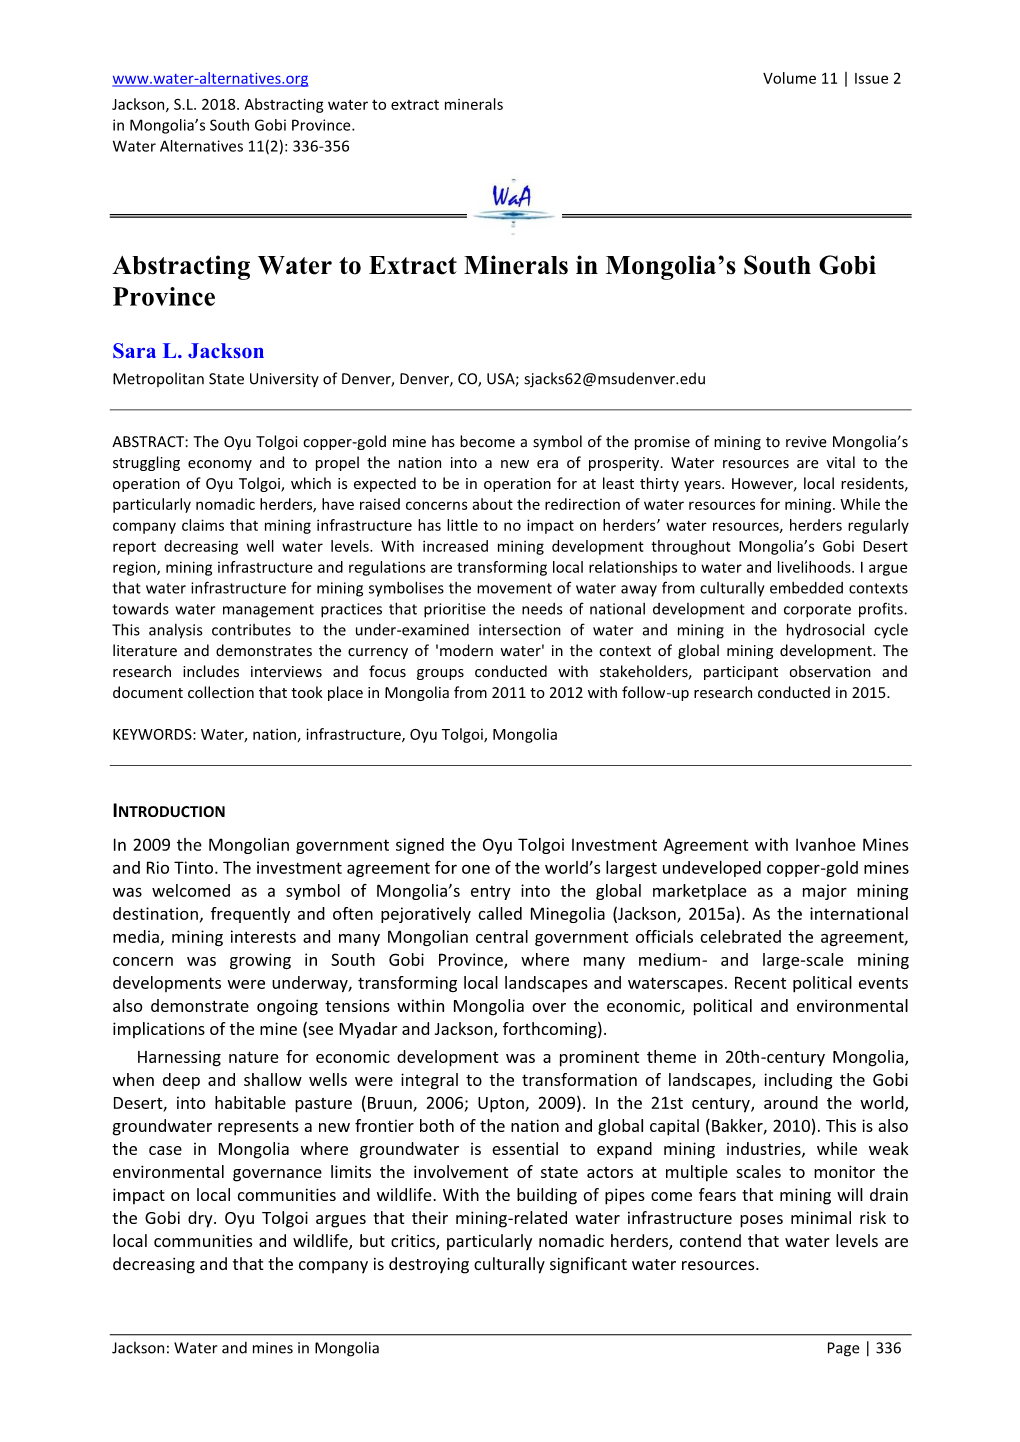 Abstracting Water to Extract Minerals in Mongolia's South Gobi Province